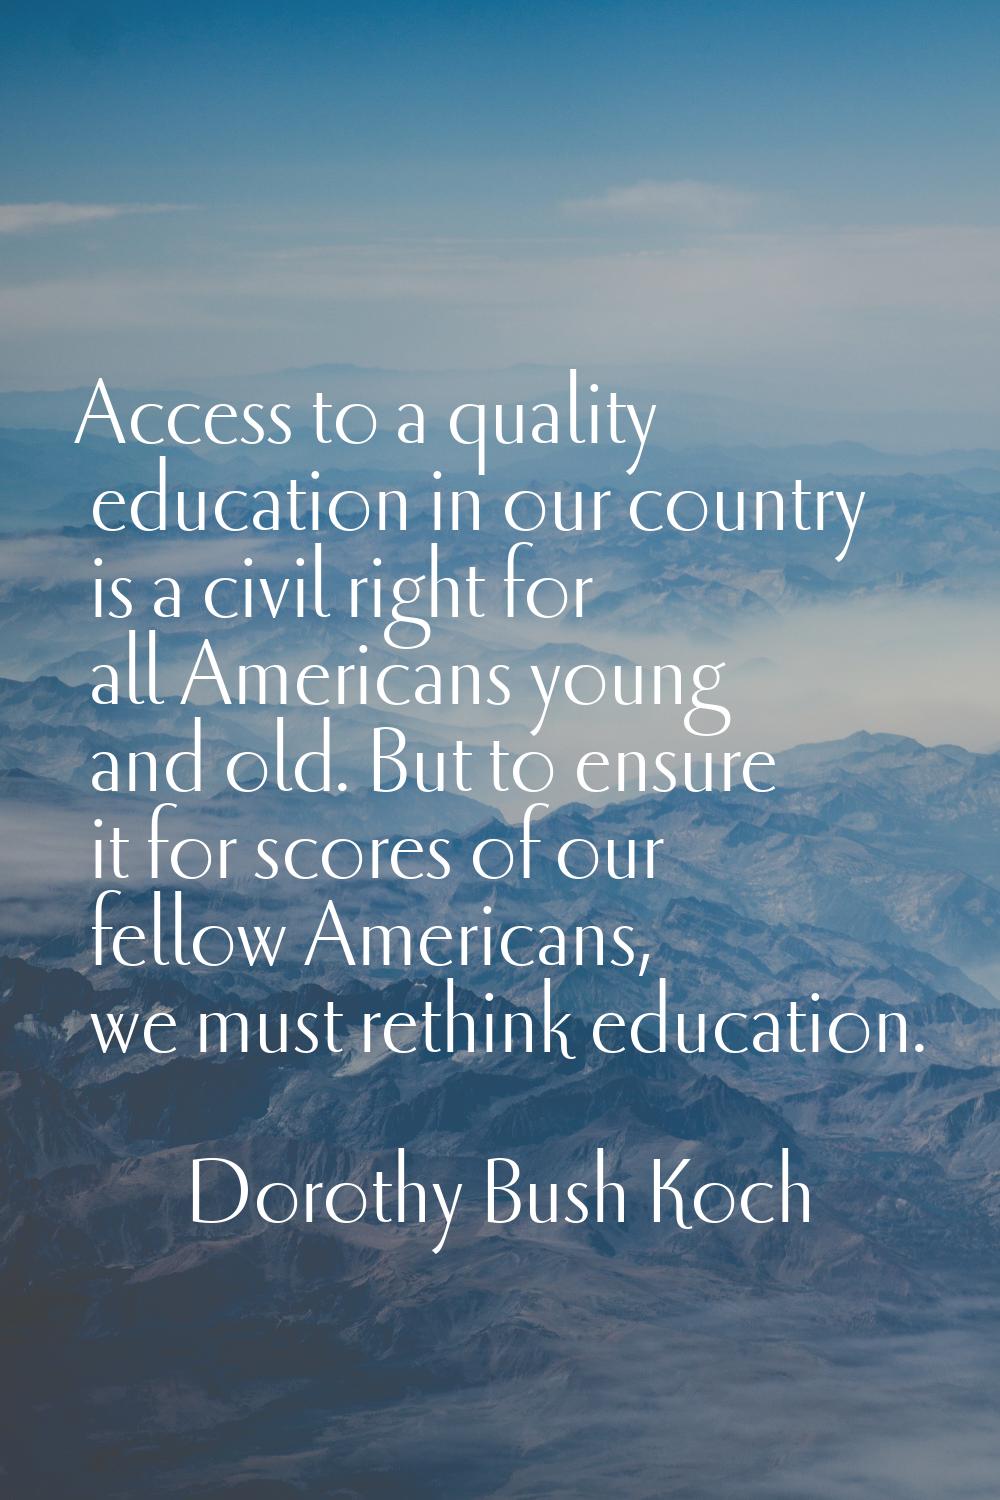 Access to a quality education in our country is a civil right for all Americans young and old. But 